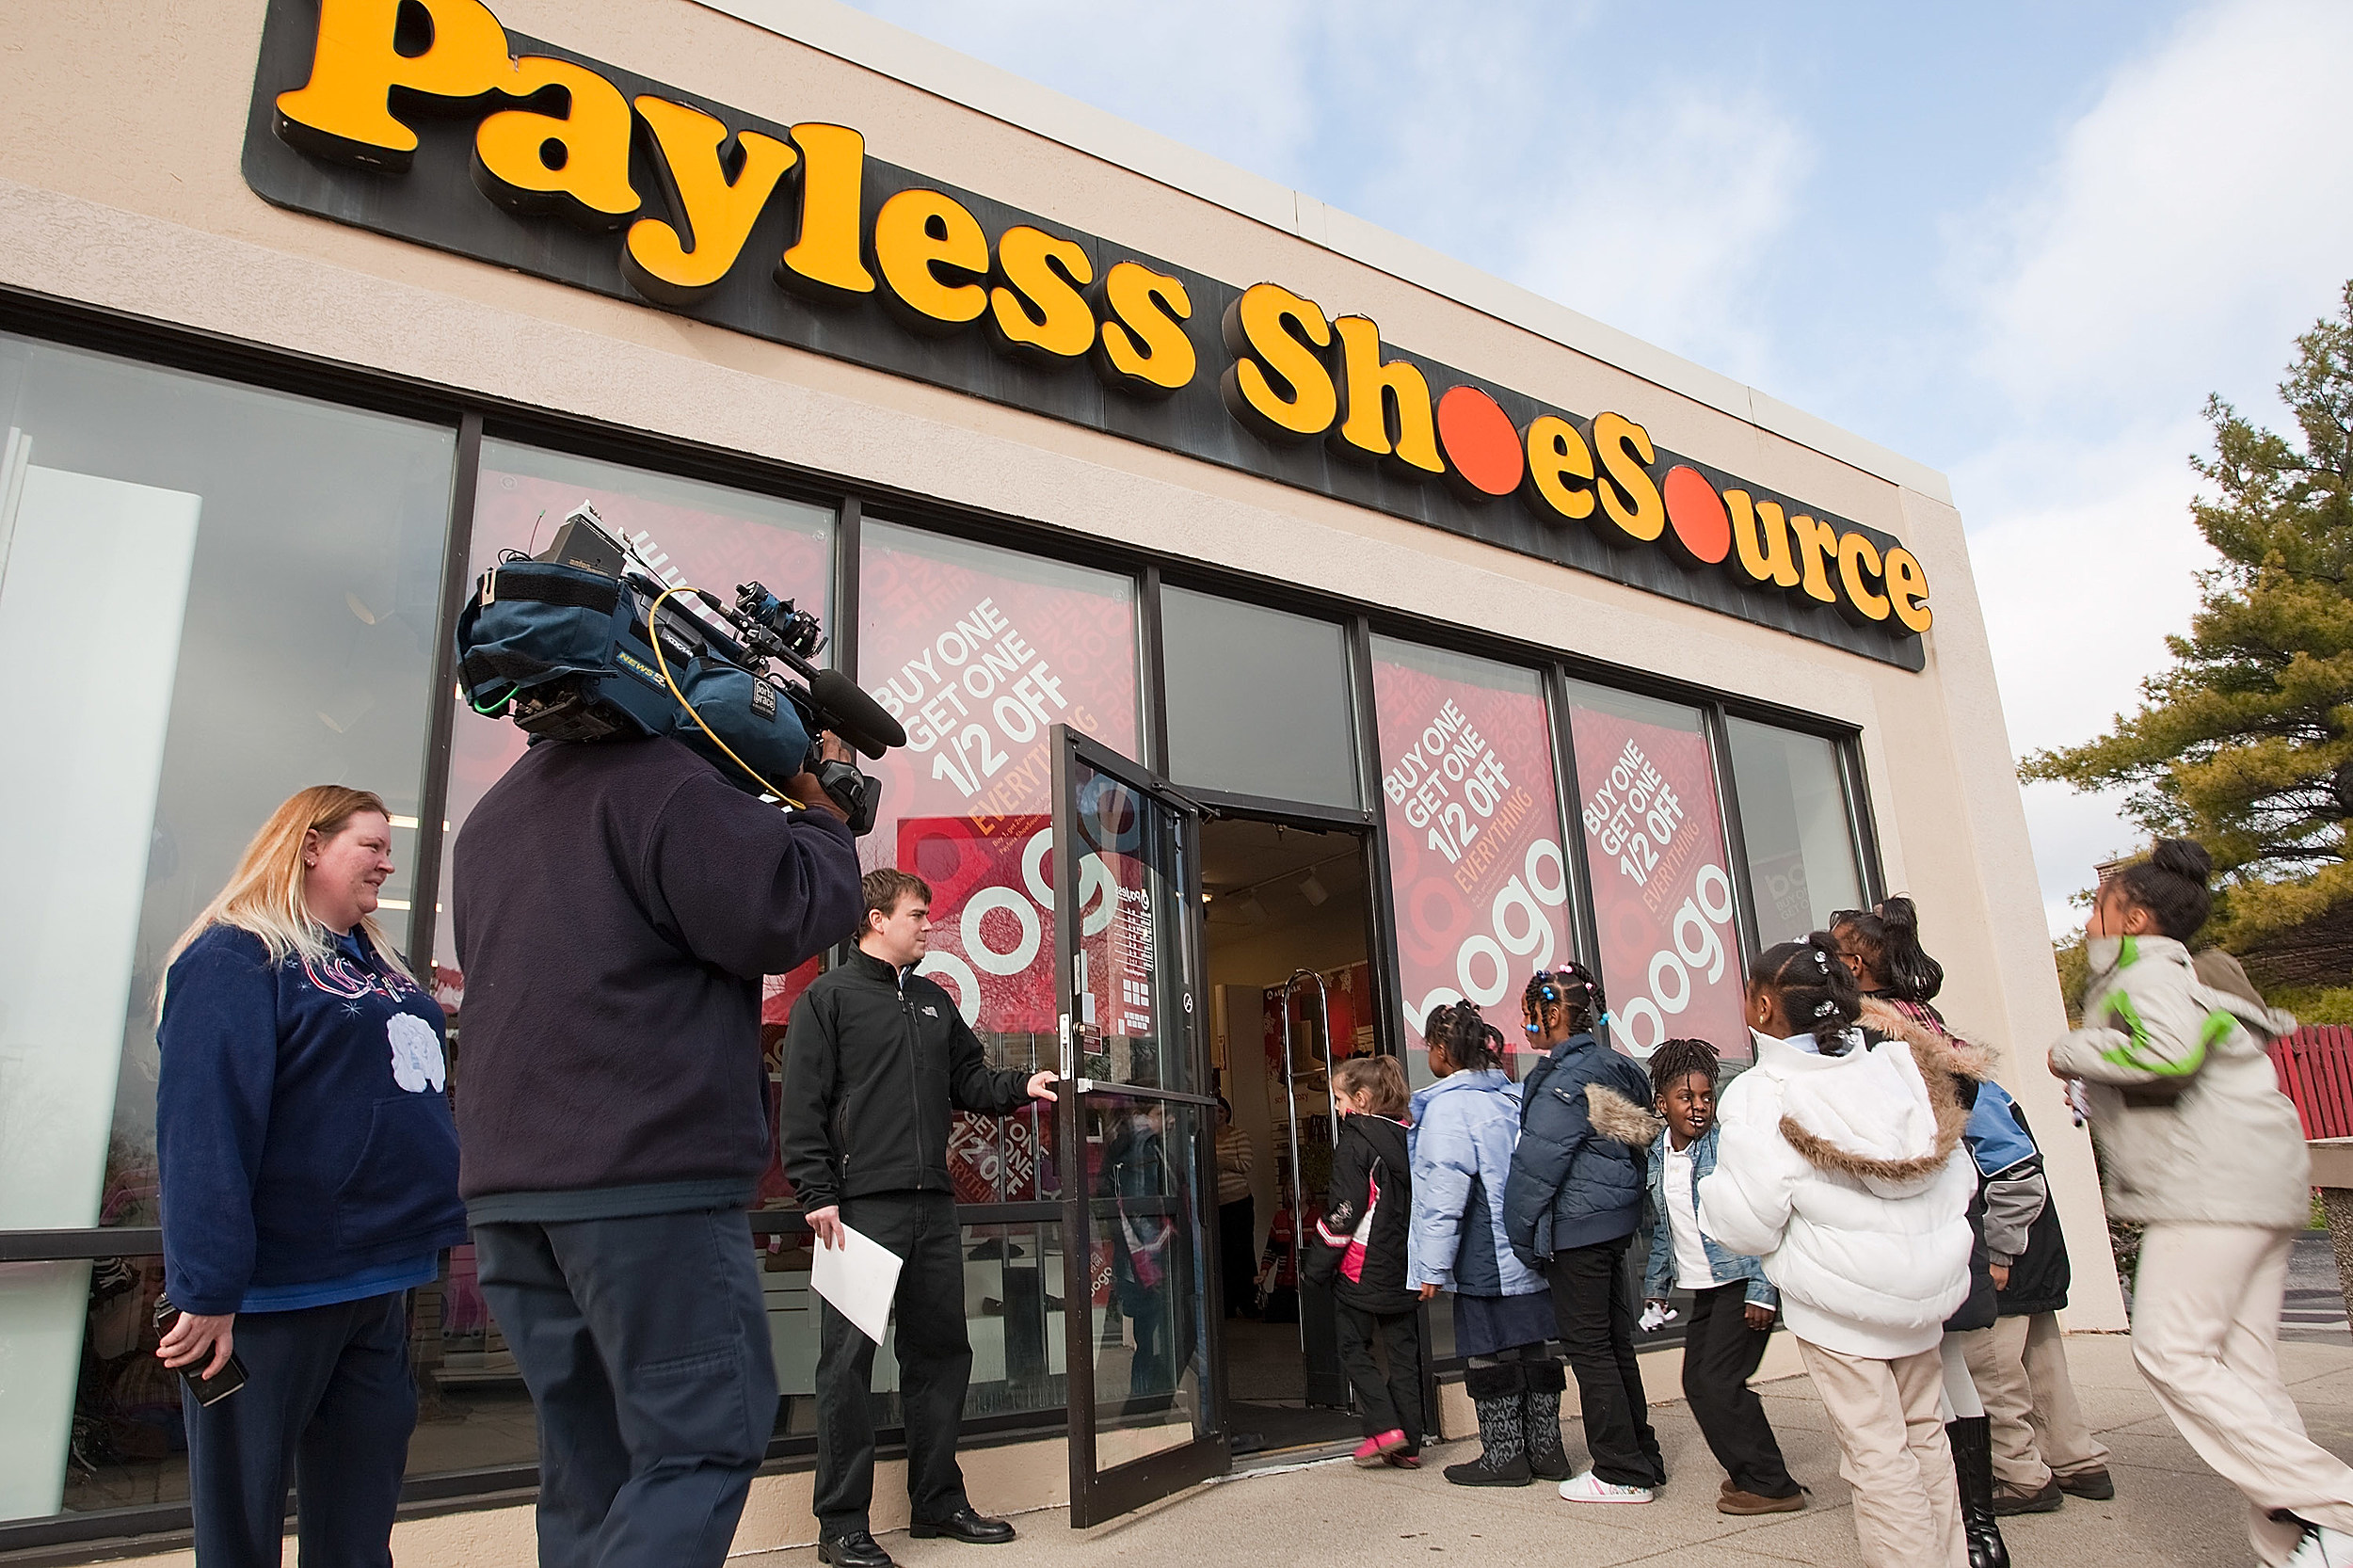 payless central